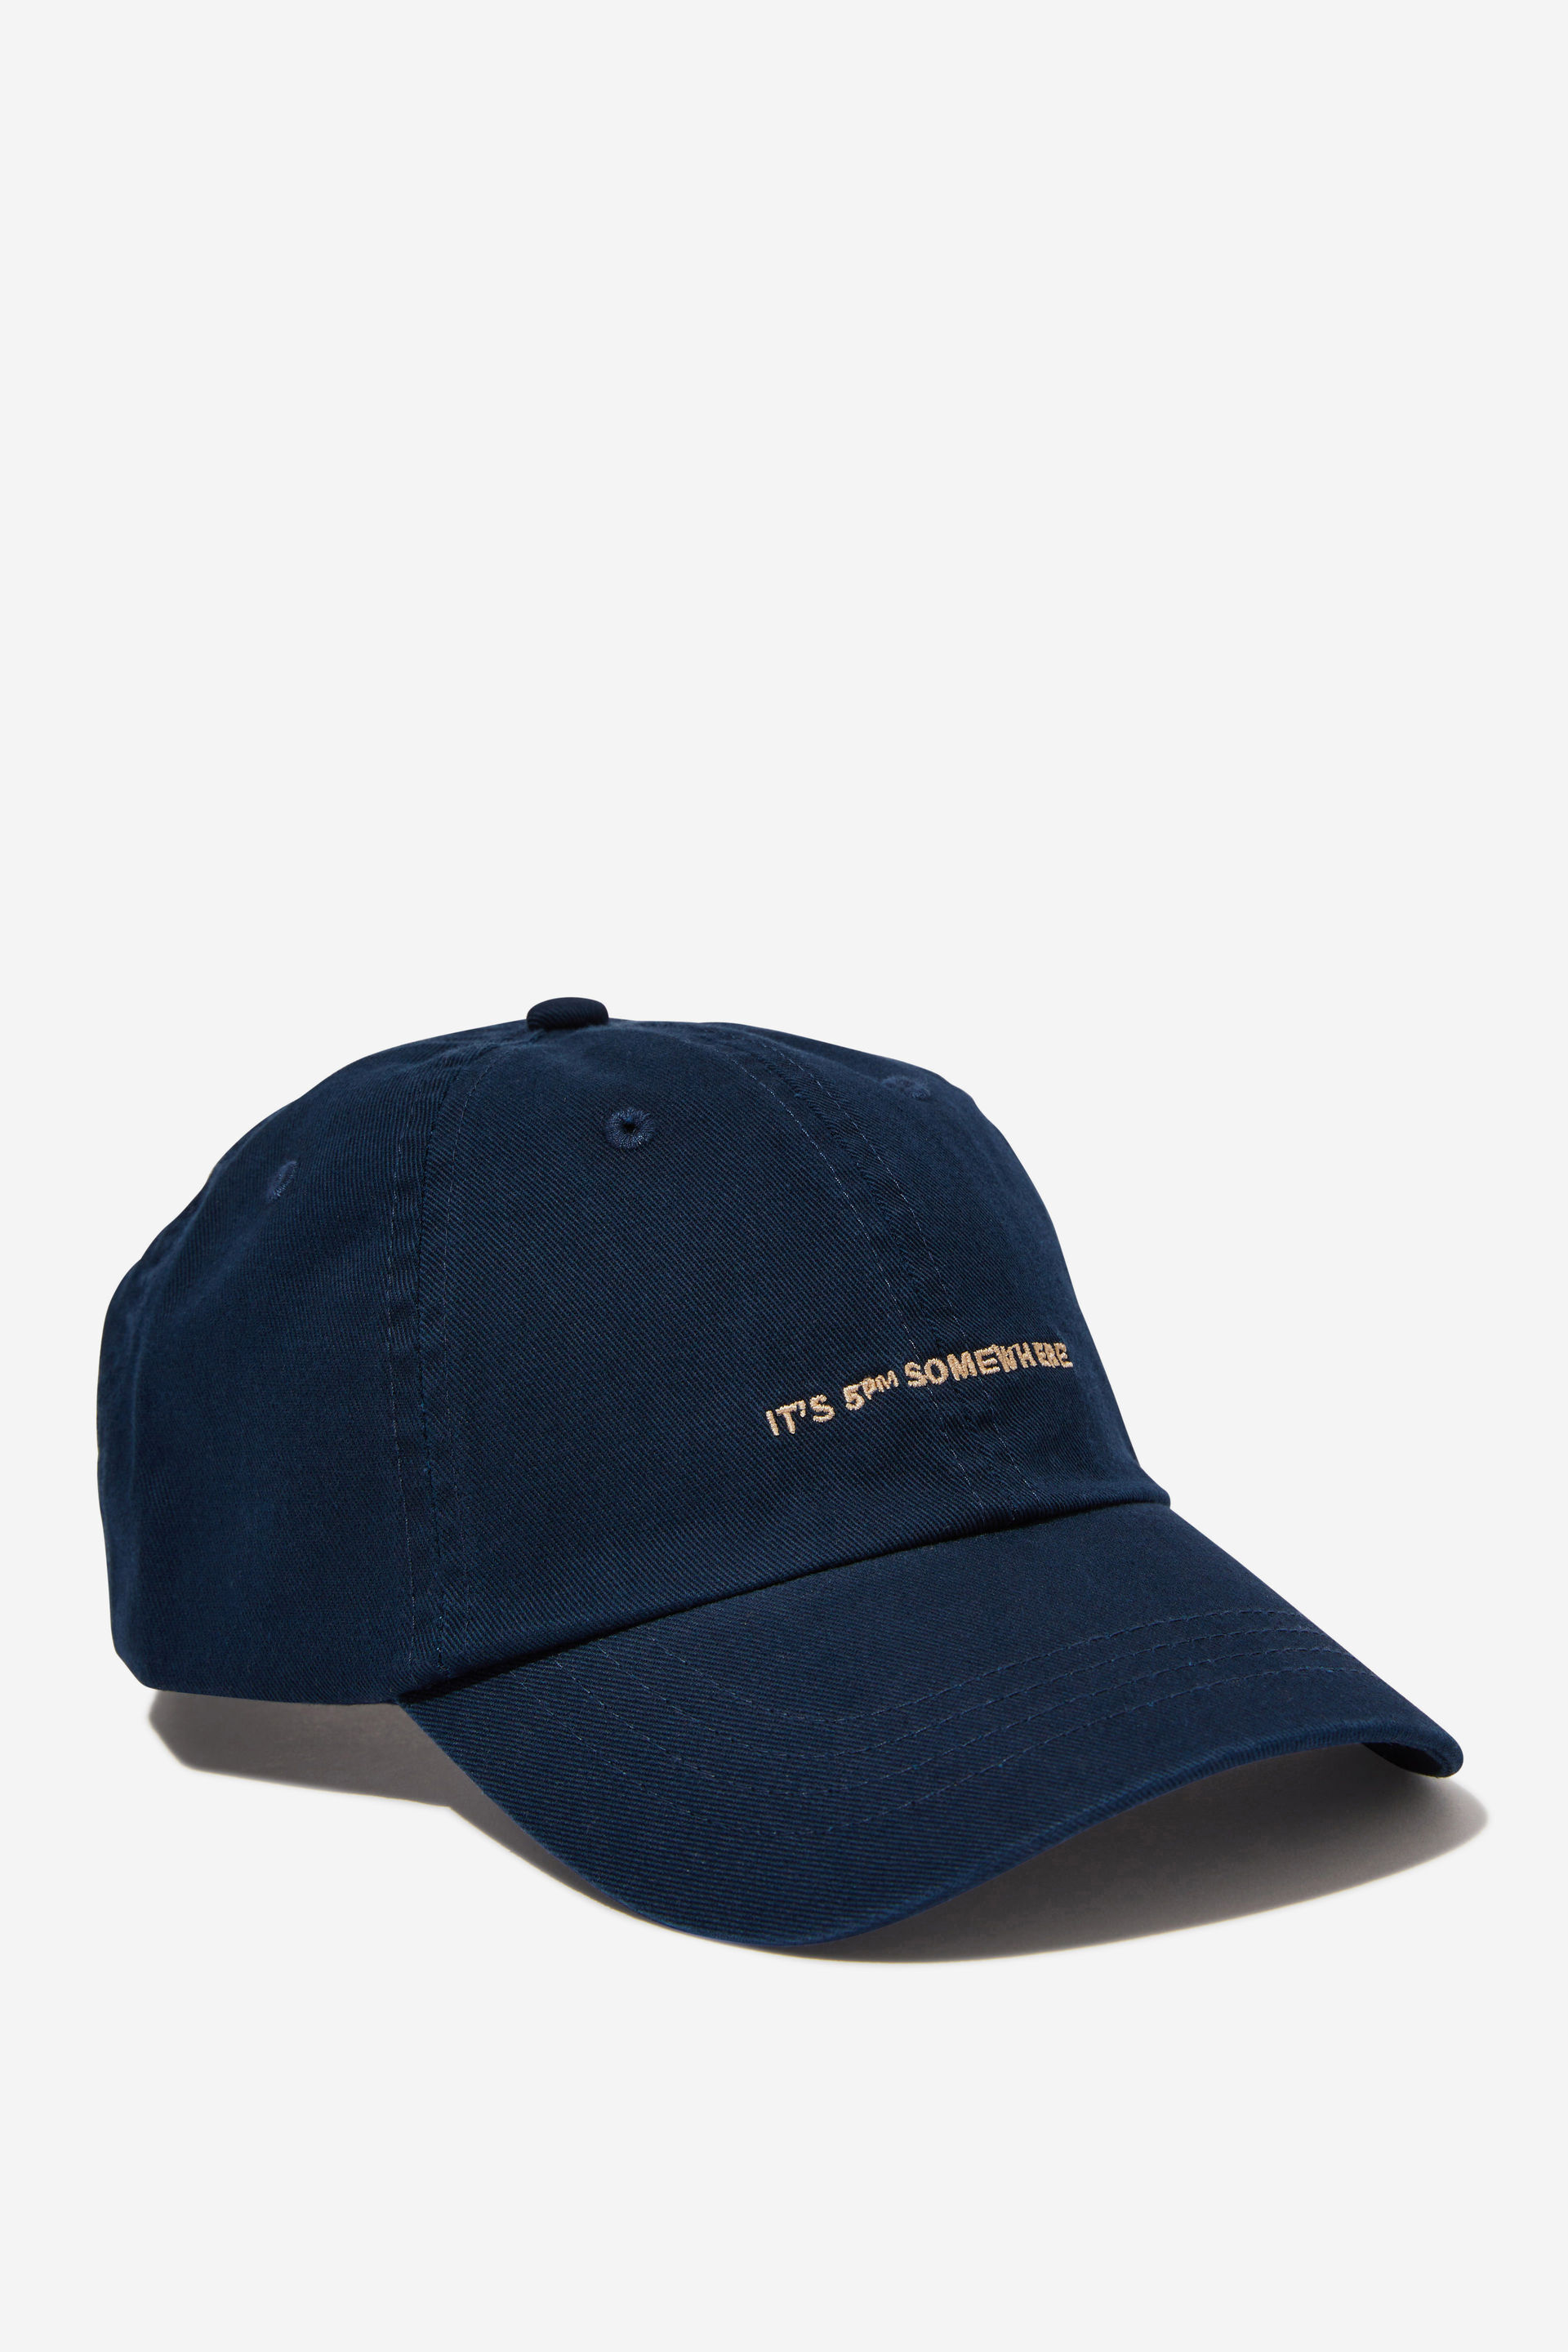 Just Another Dad Cap